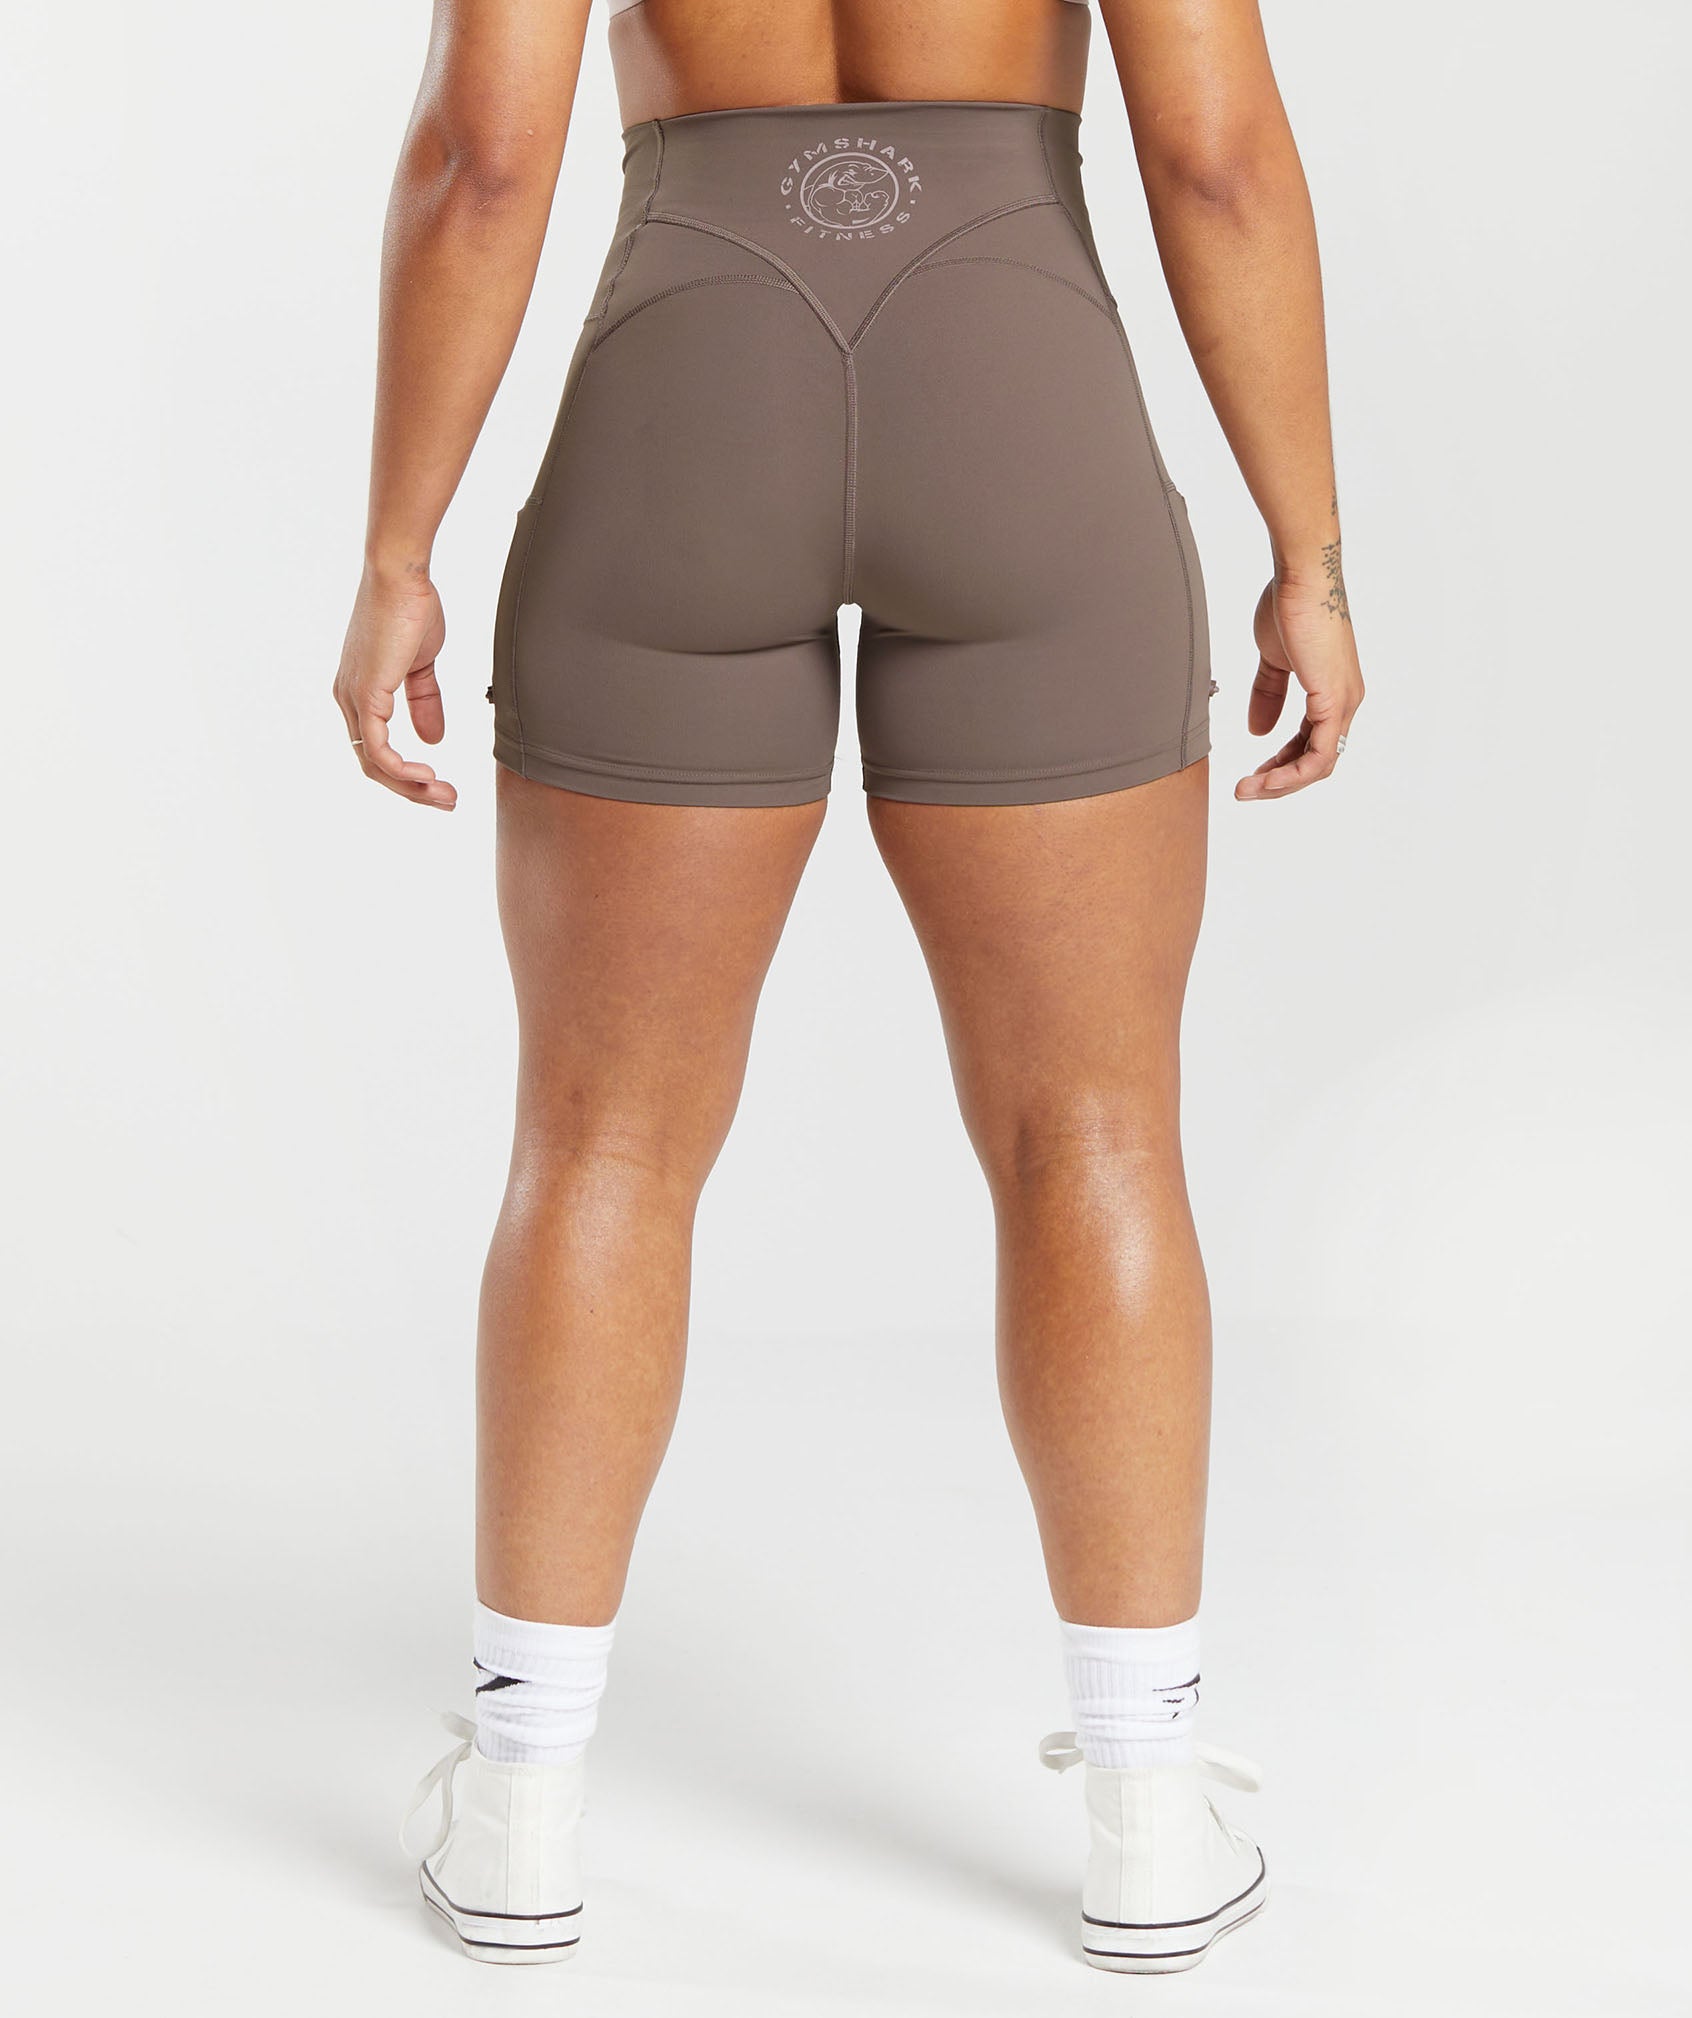 Legacy Tight Shorts in Walnut Mauve - view 2